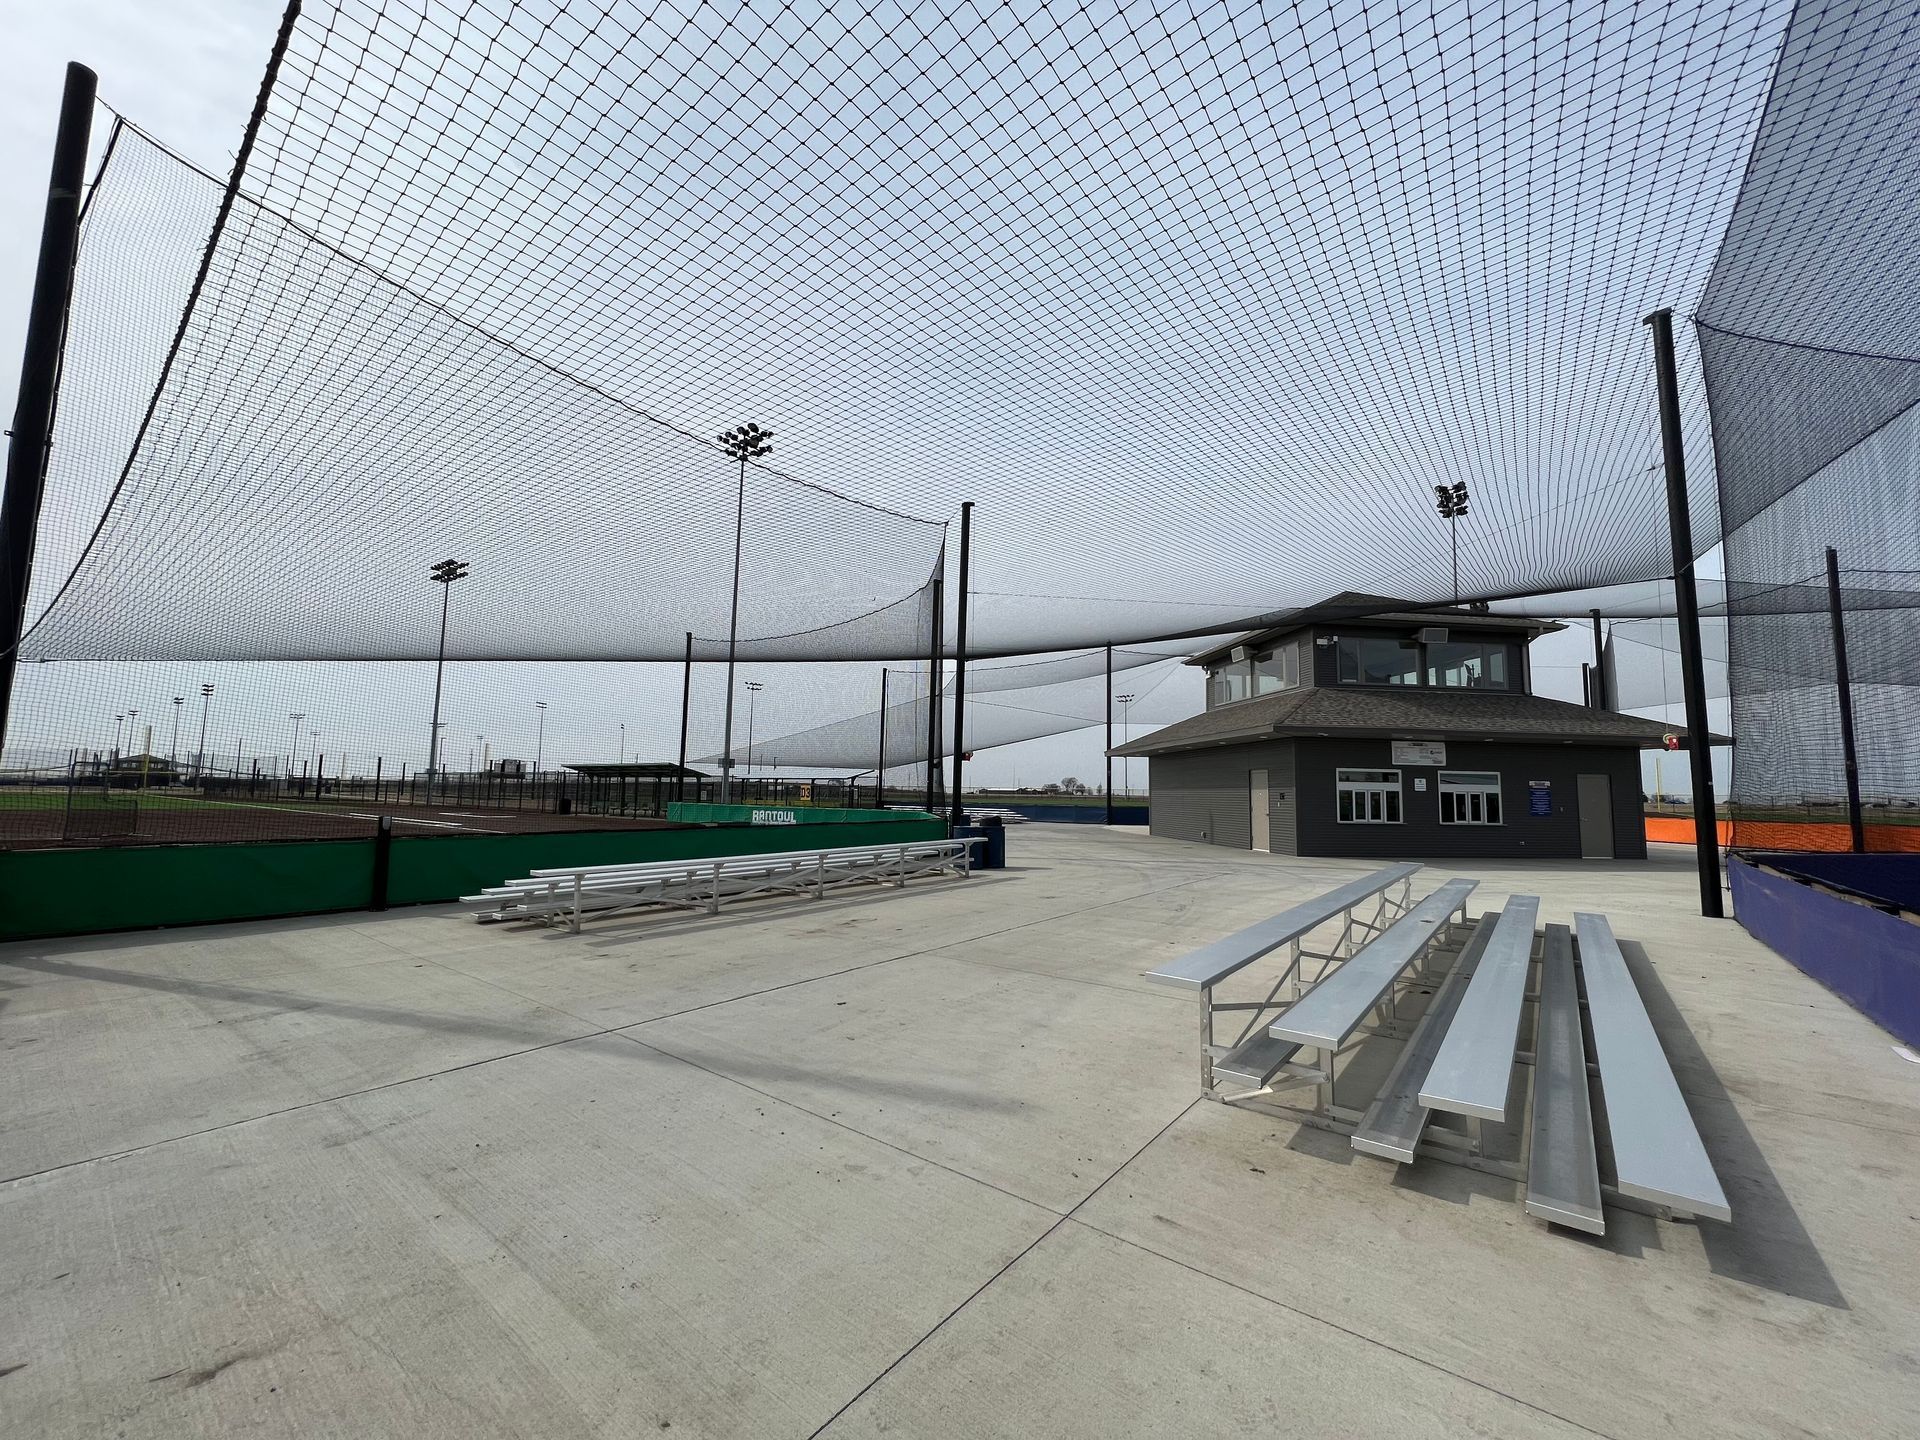 A baseball field with bleachers and a building in the background